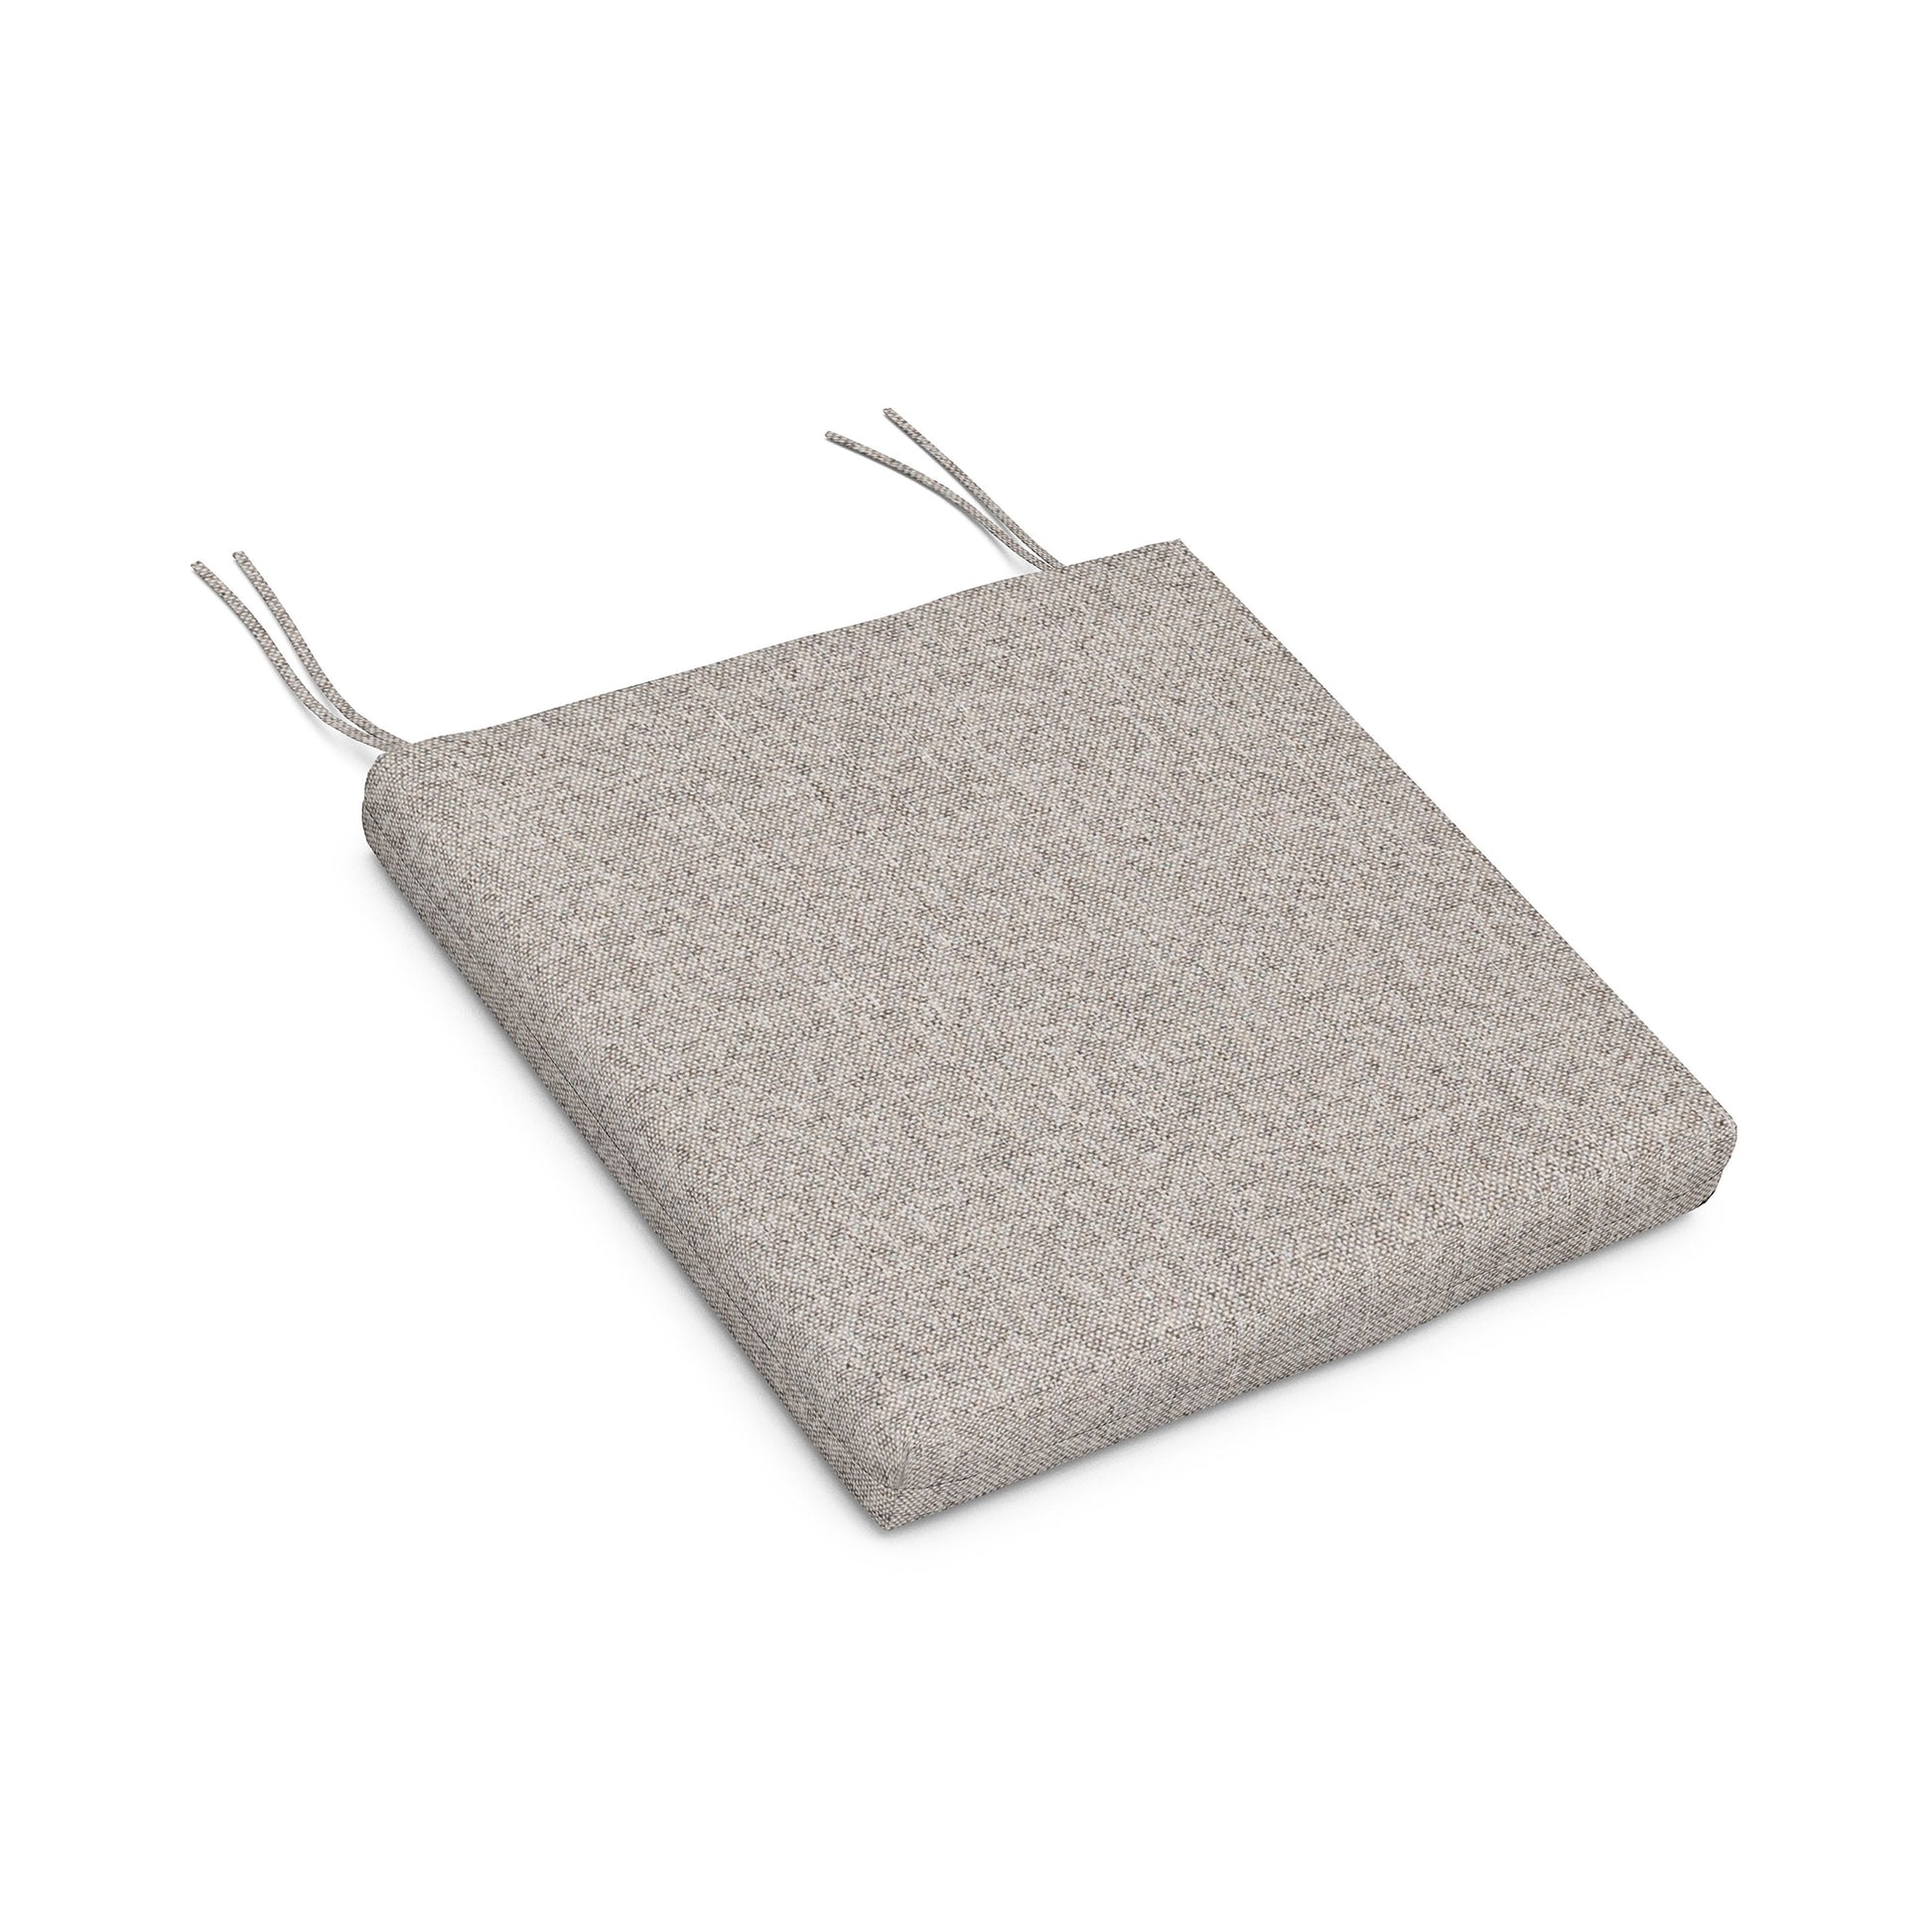 A plain gray POLYWOOD® XPWS0183 seat cushion with two tie straps at each end, displayed on a white background.